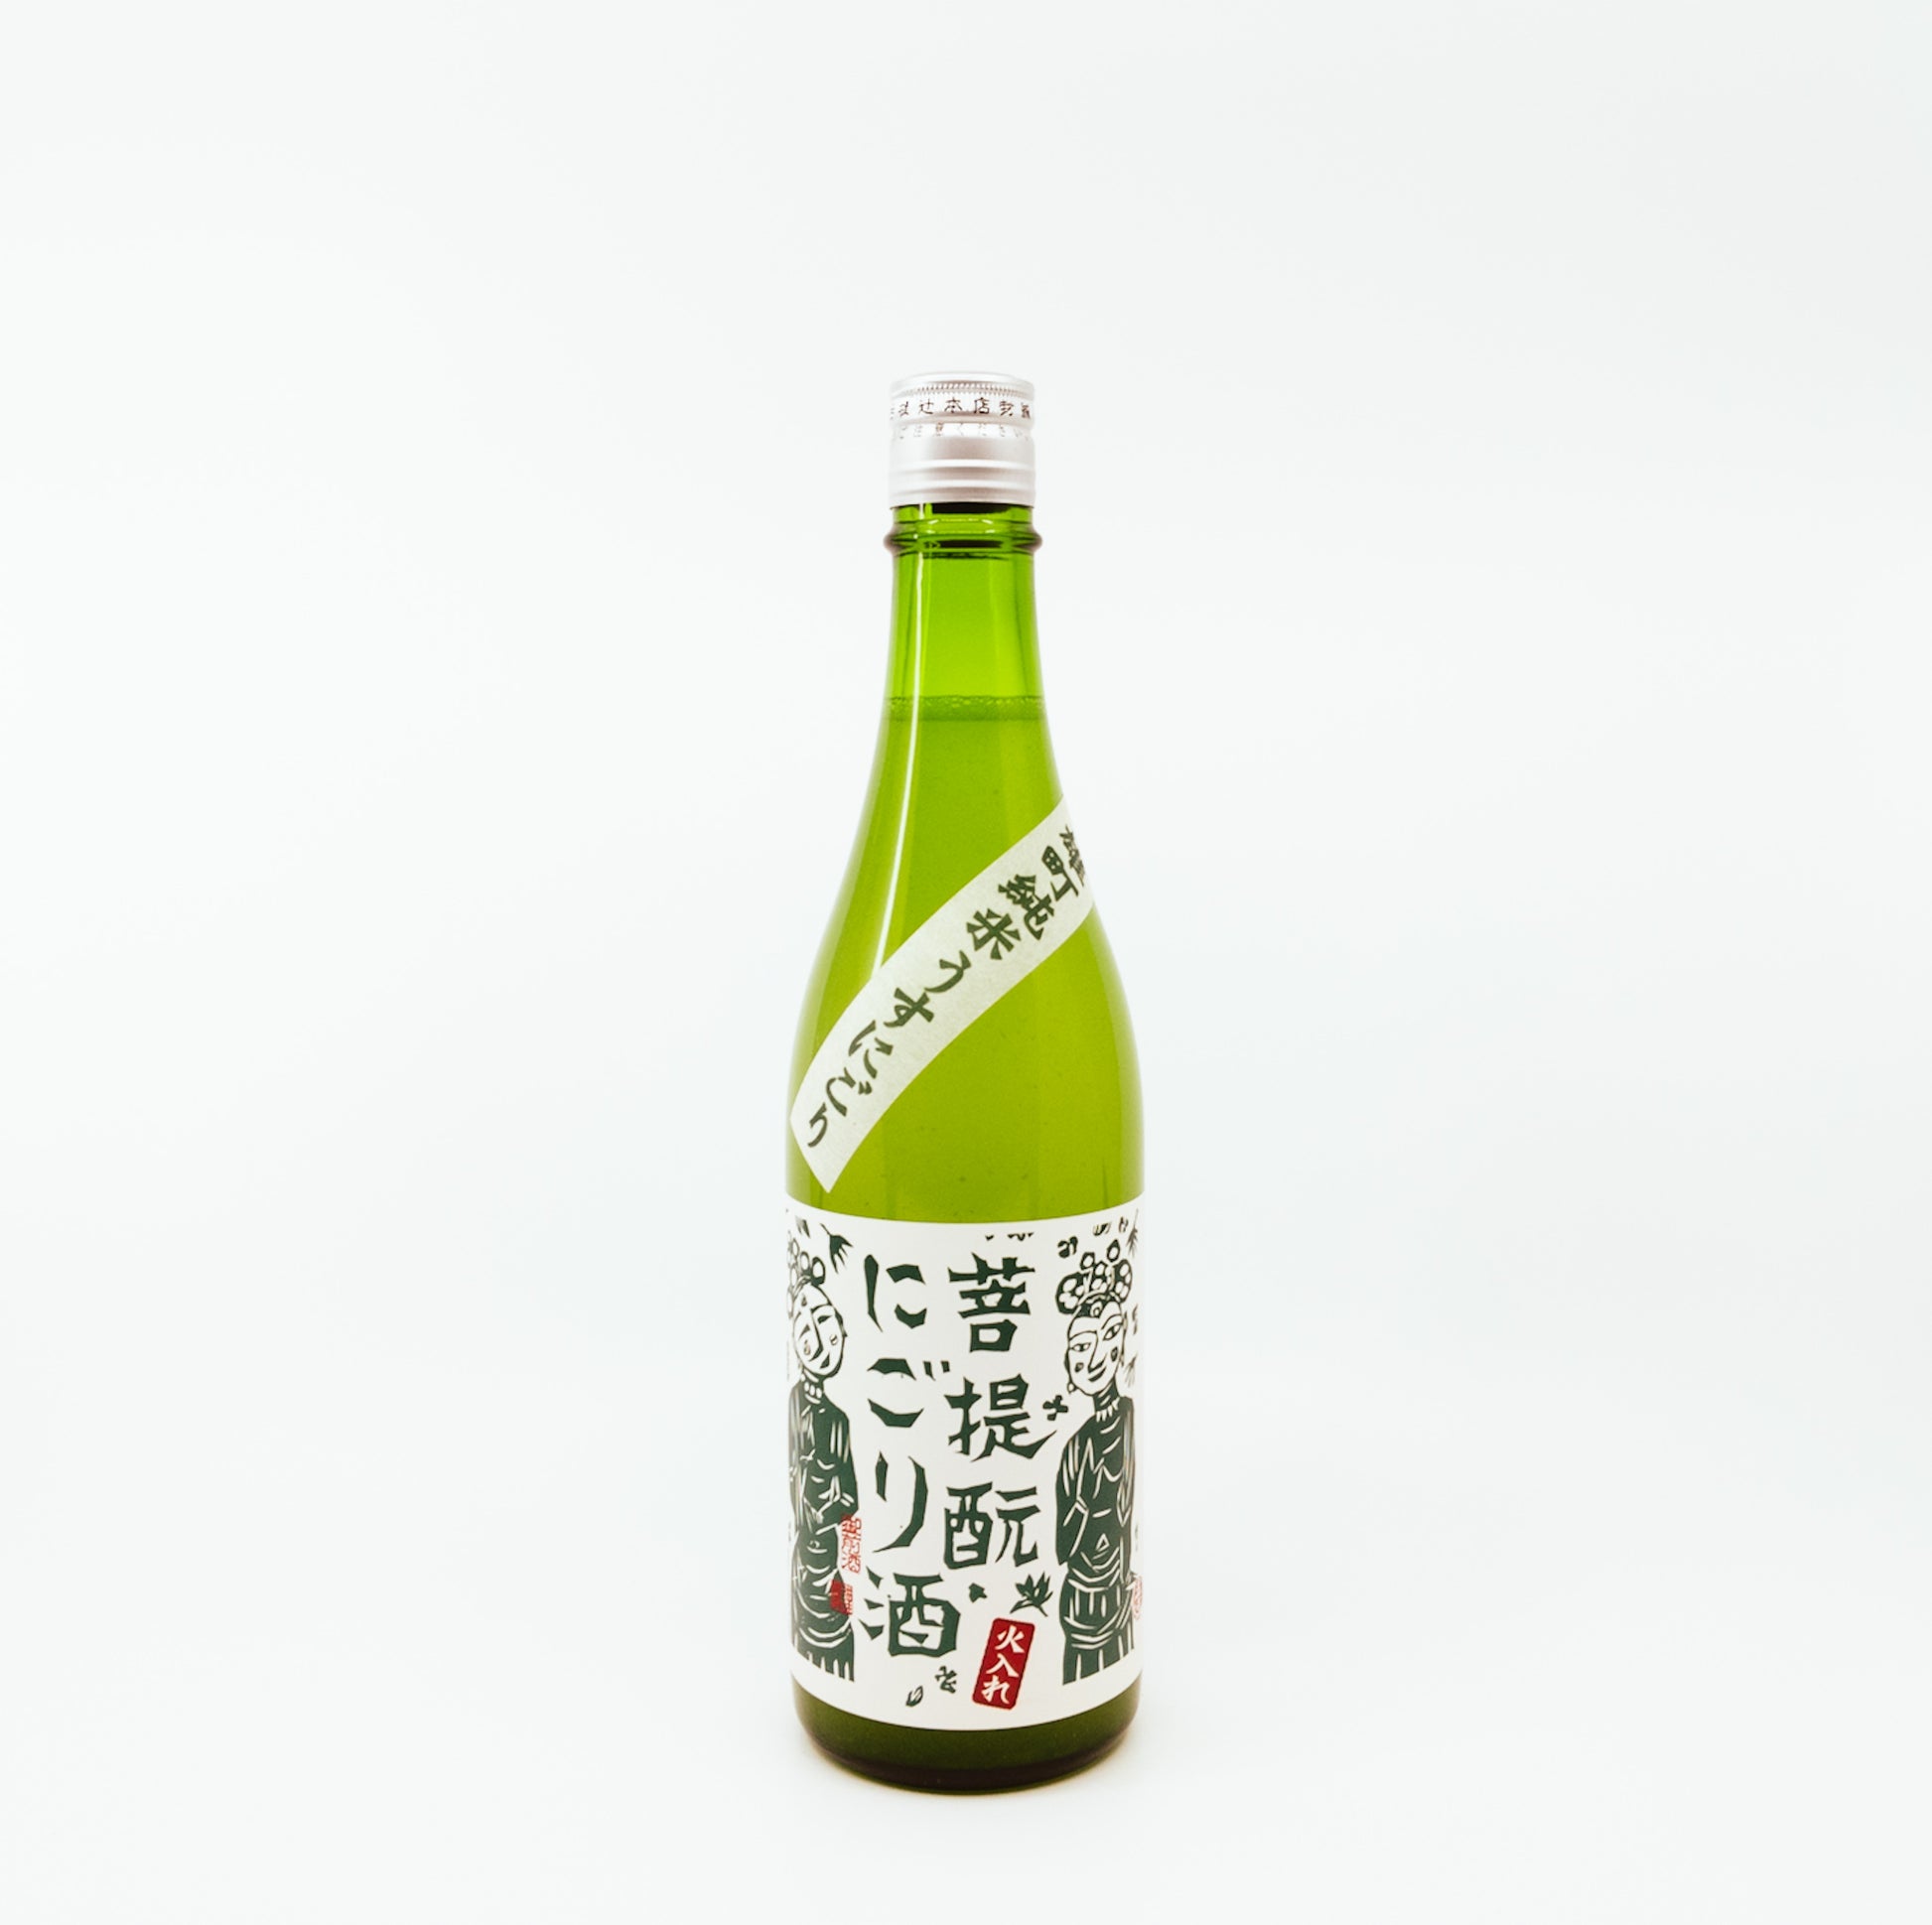 green bottle with two green illustrated people on white label